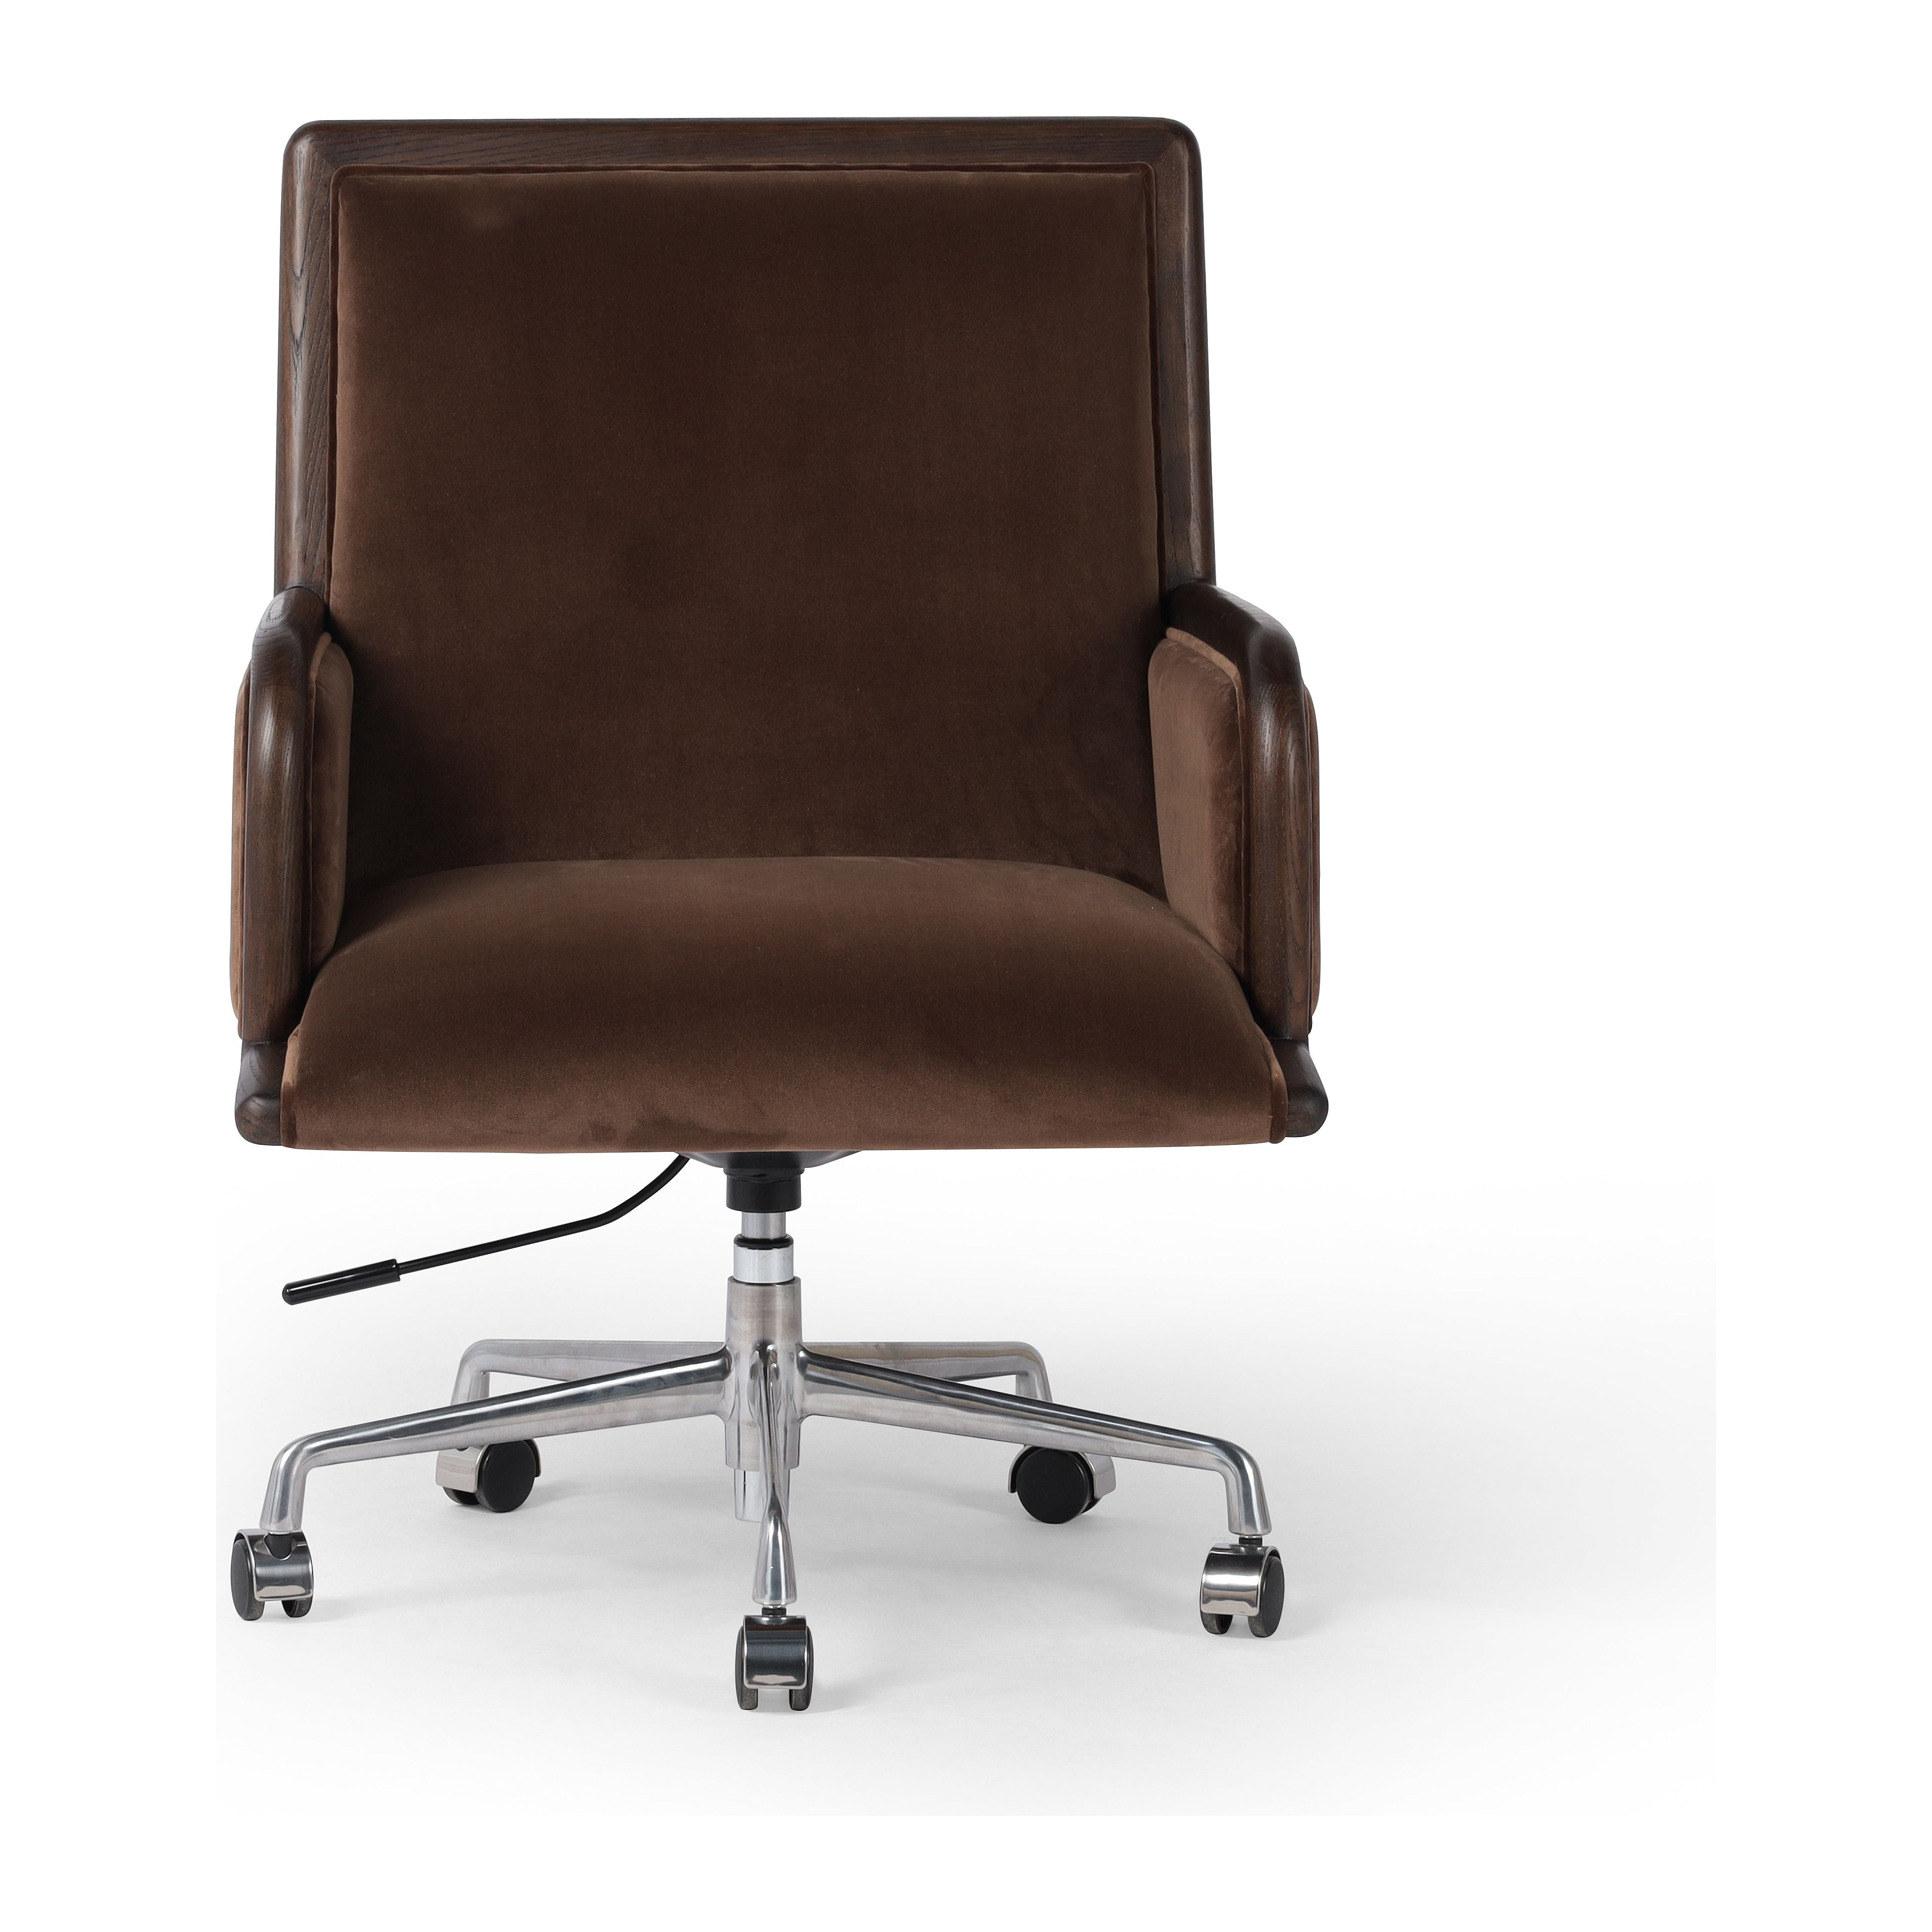 This comfort-driven take on the modern desk chair features velvety cocoa-colored upholstery, pared with a wooden frame. Casters and seat height adjustability for ease as you work. Amethyst Home provides interior design, new construction, custom furniture, and area rugs in the Washington metro area.